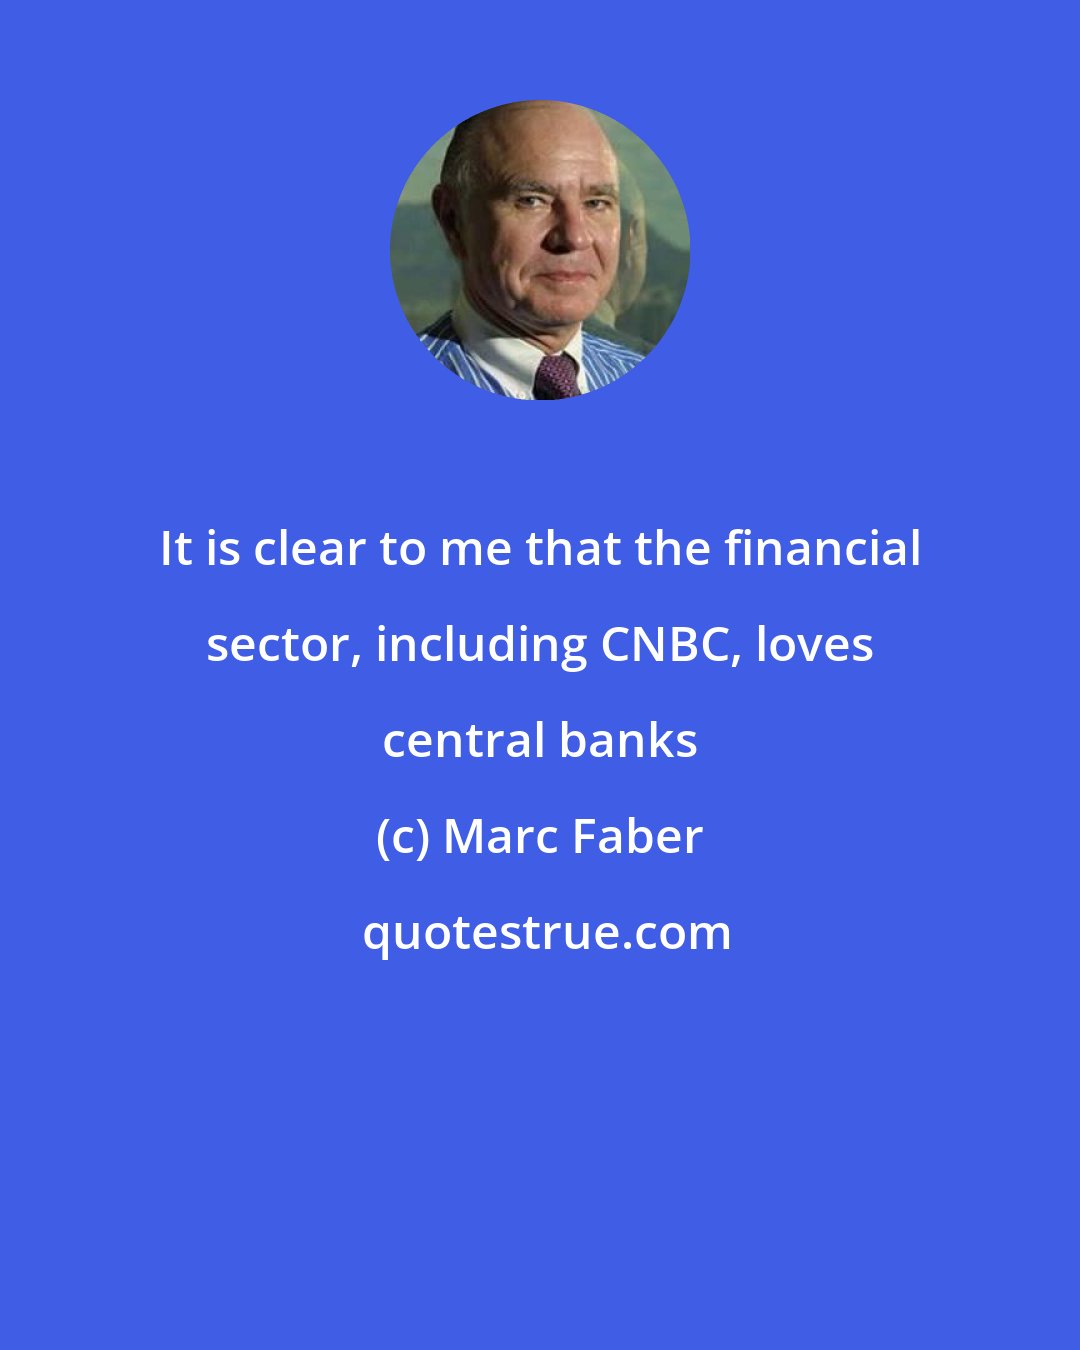 Marc Faber: It is clear to me that the financial sector, including CNBC, loves central banks